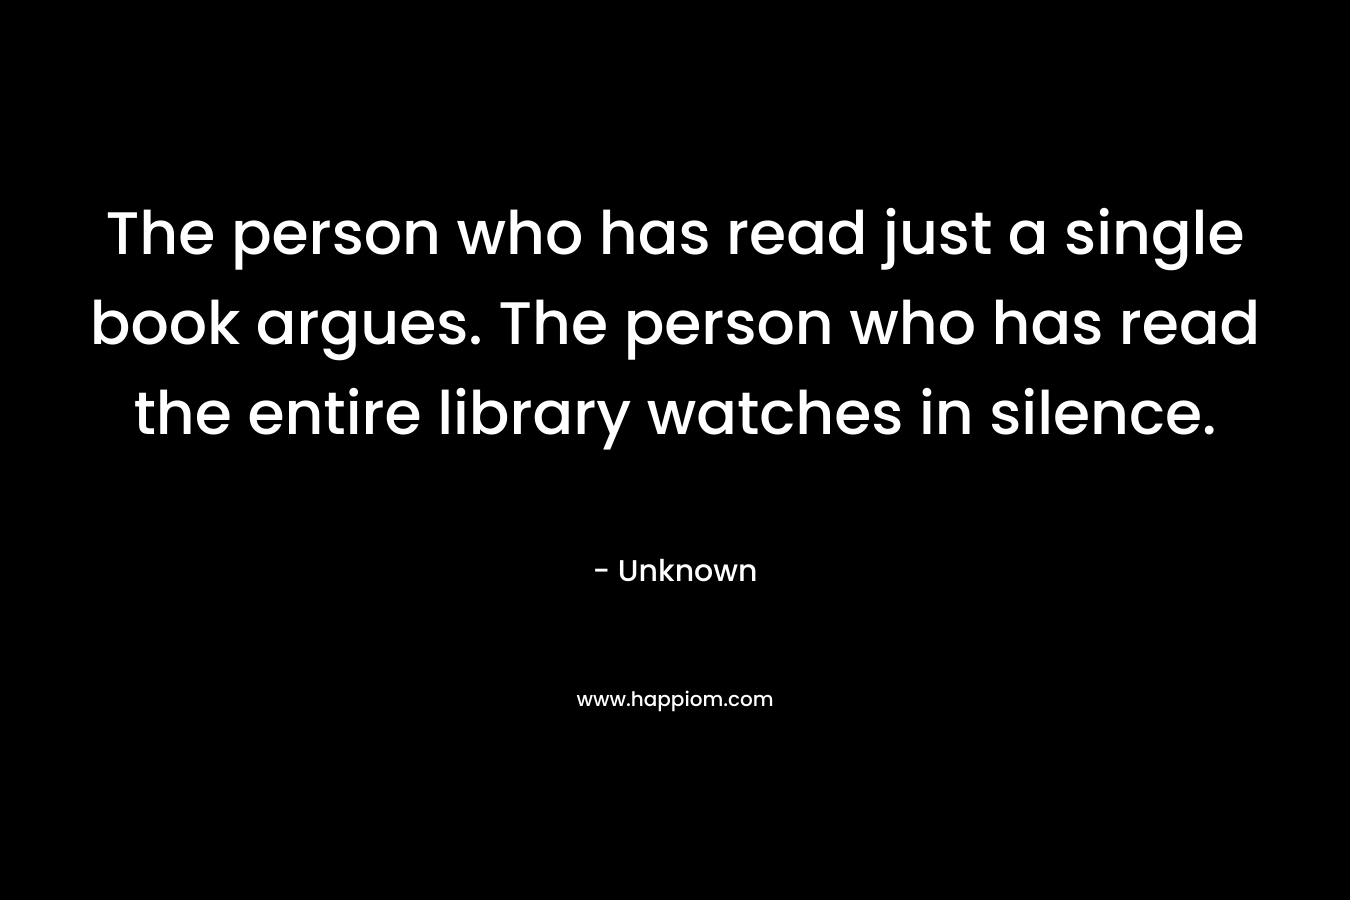 The person who has read just a single book argues. The person who has read the entire library watches in silence. – Unknown